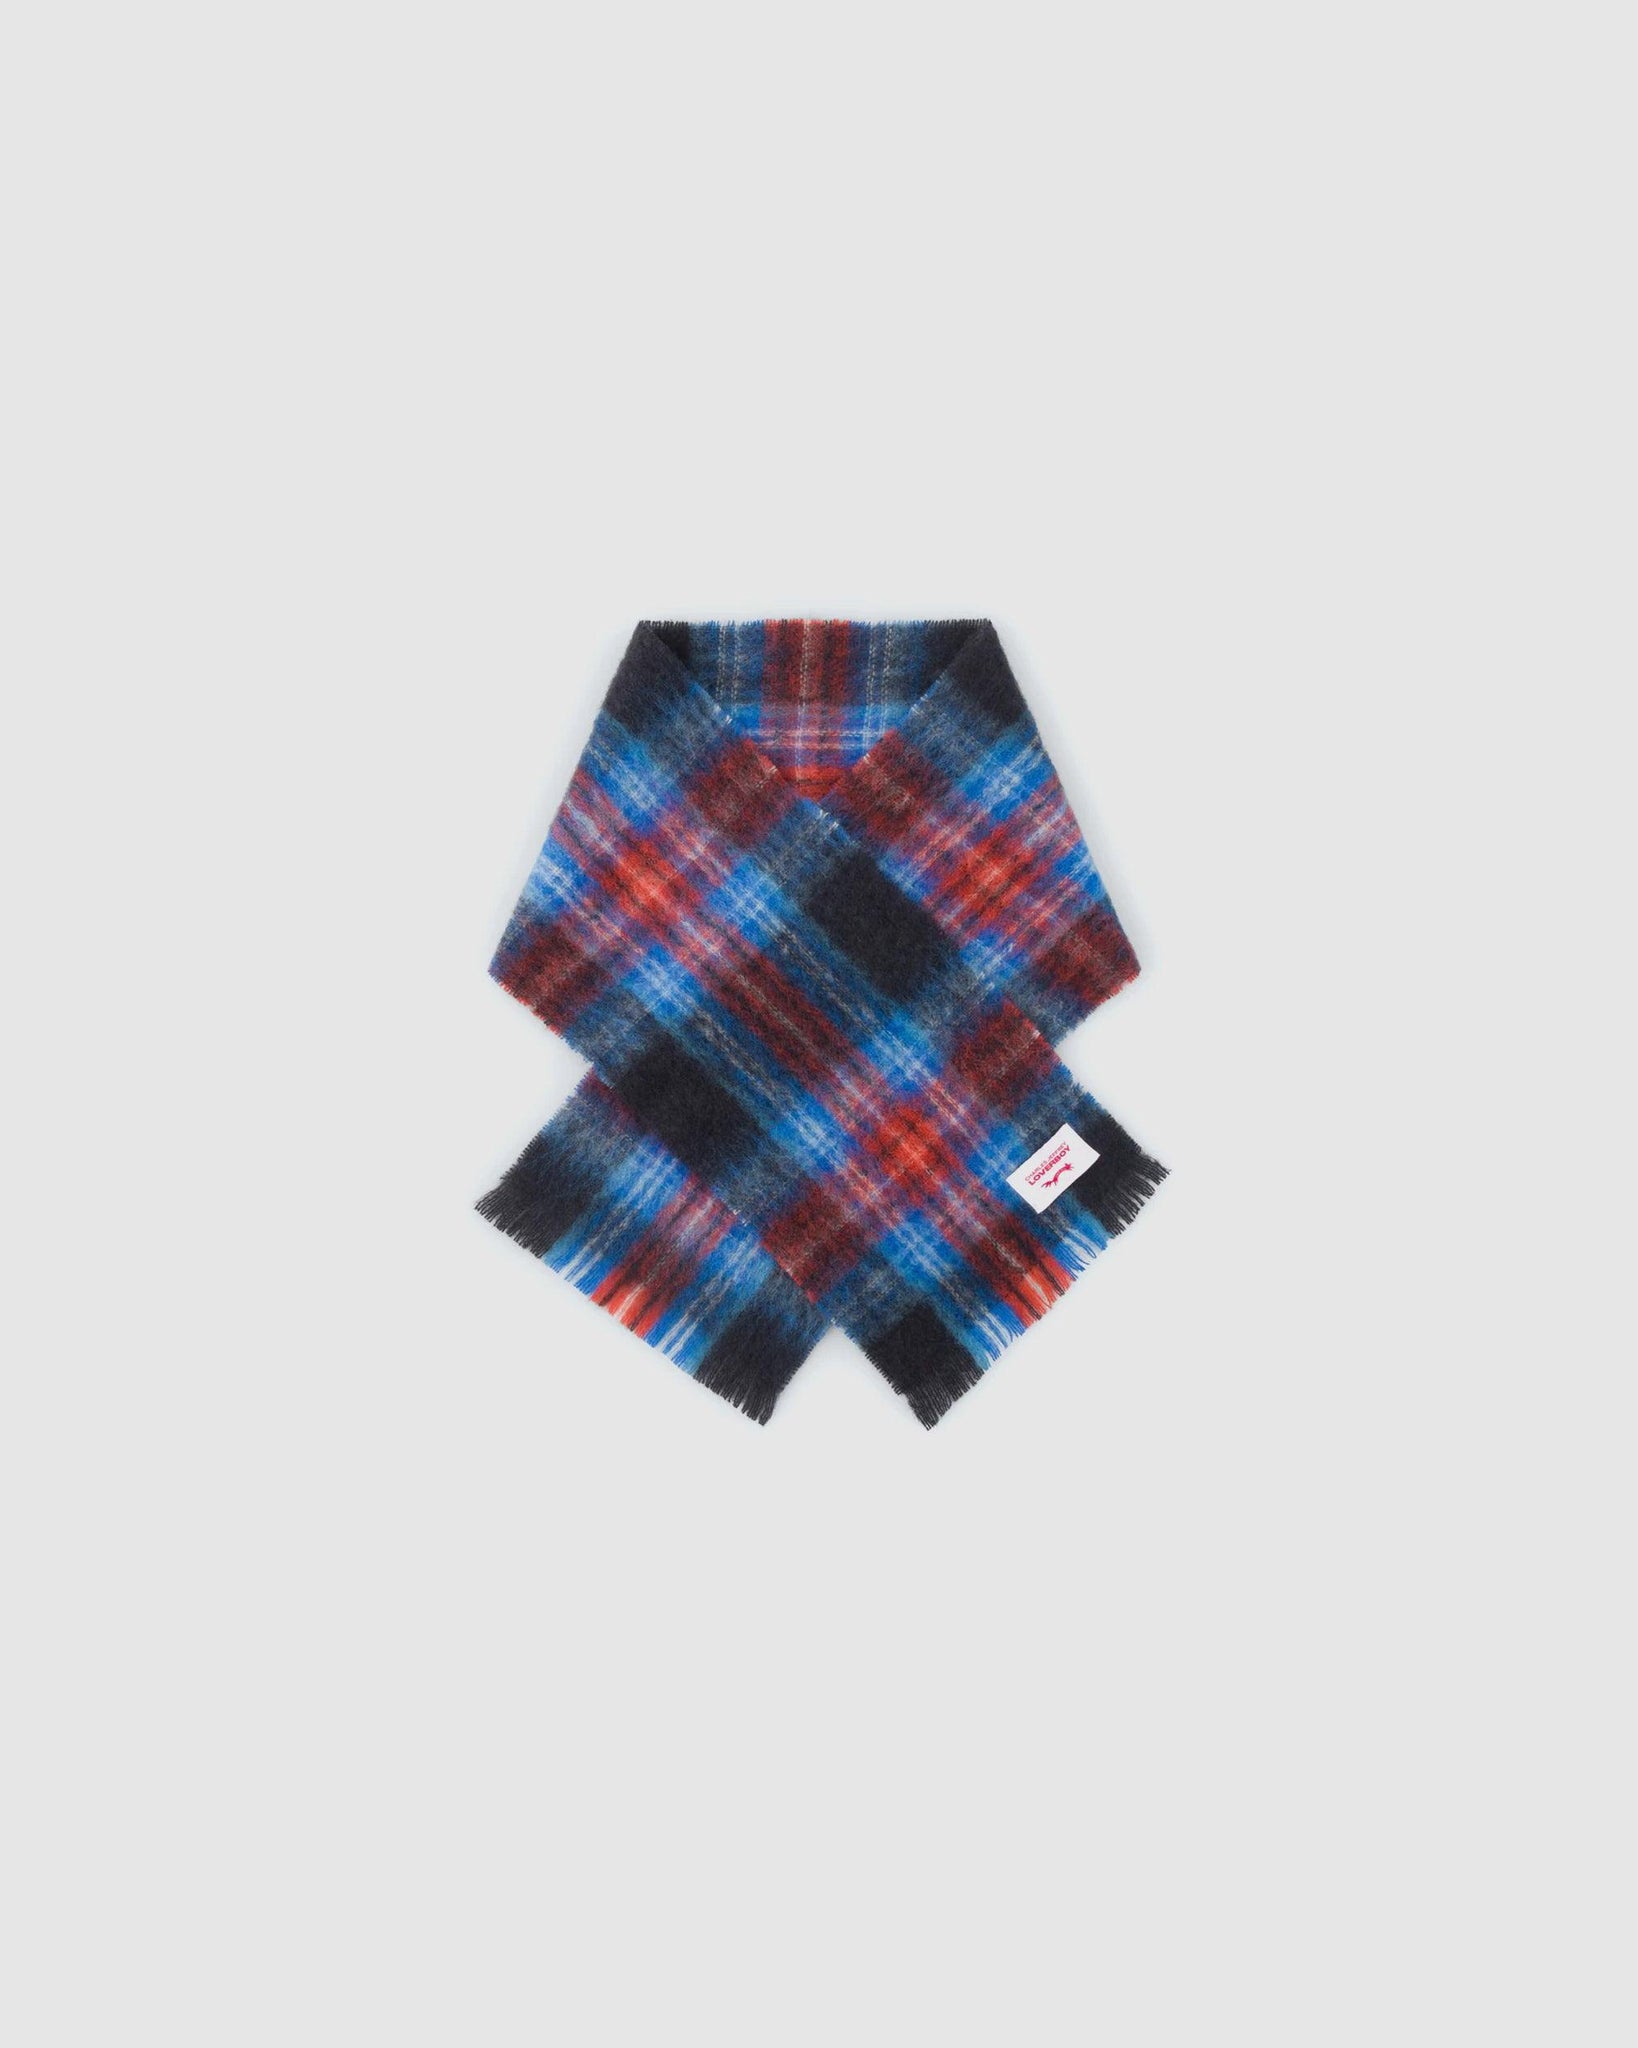 Mohair Scarf Loverboy Tartan - {{ collection.title }} - Chinatown Country Club 